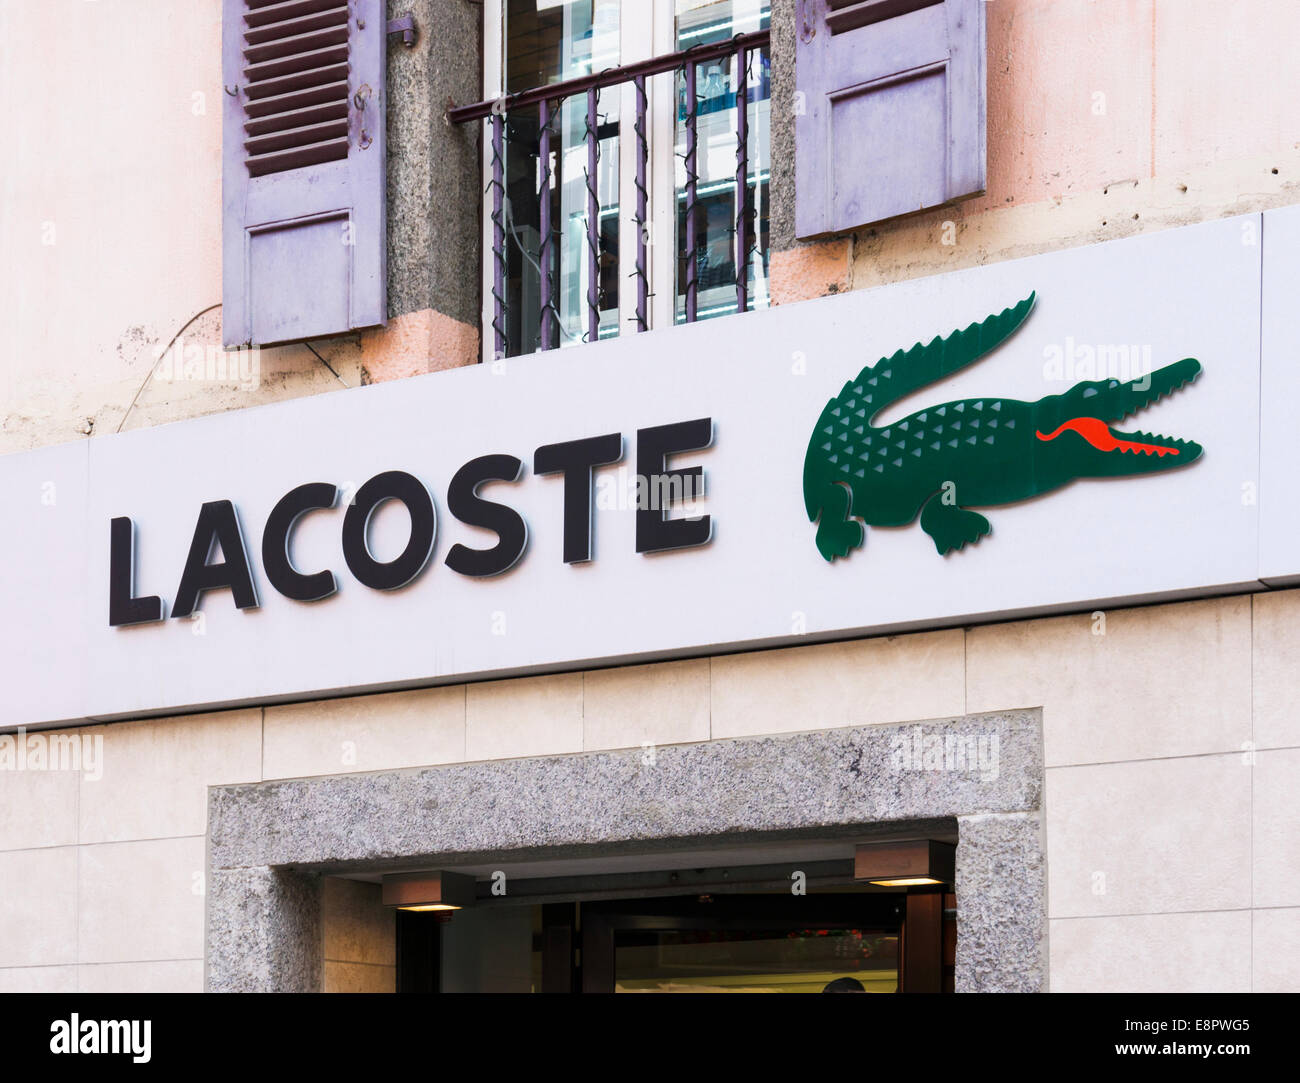 Lacoste store logo on a shop France, Europe Stock Photo - Alamy